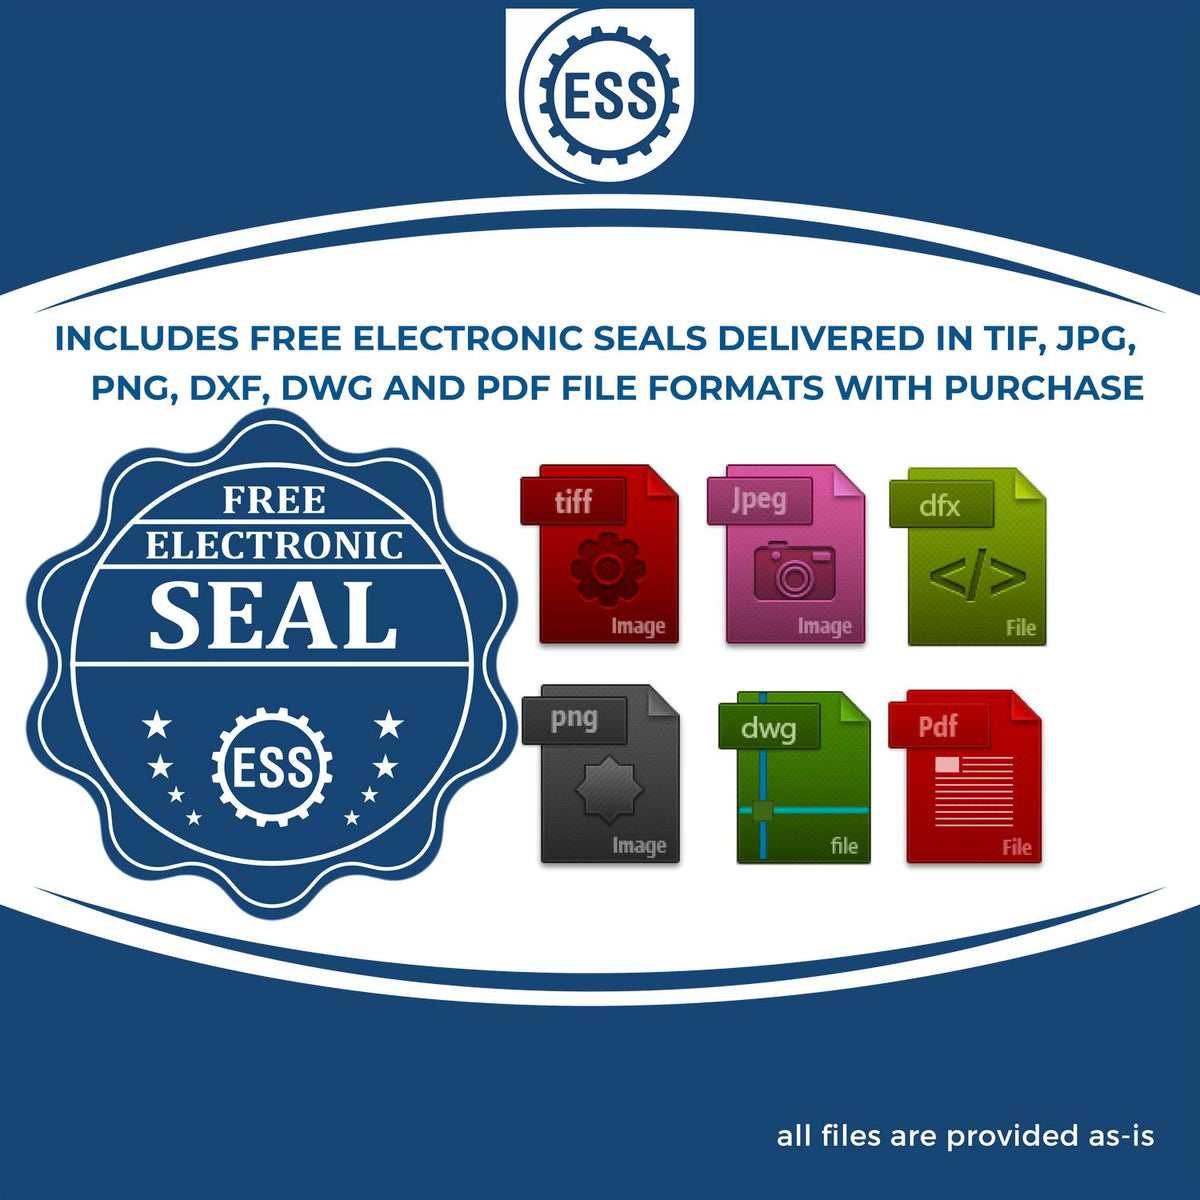 An infographic for the free electronic seal for the MaxLight Premium Pre-Inked Vermont State Seal Notarial Stamp illustrating the different file type icons such as DXF, DWG, TIF, JPG and PNG.